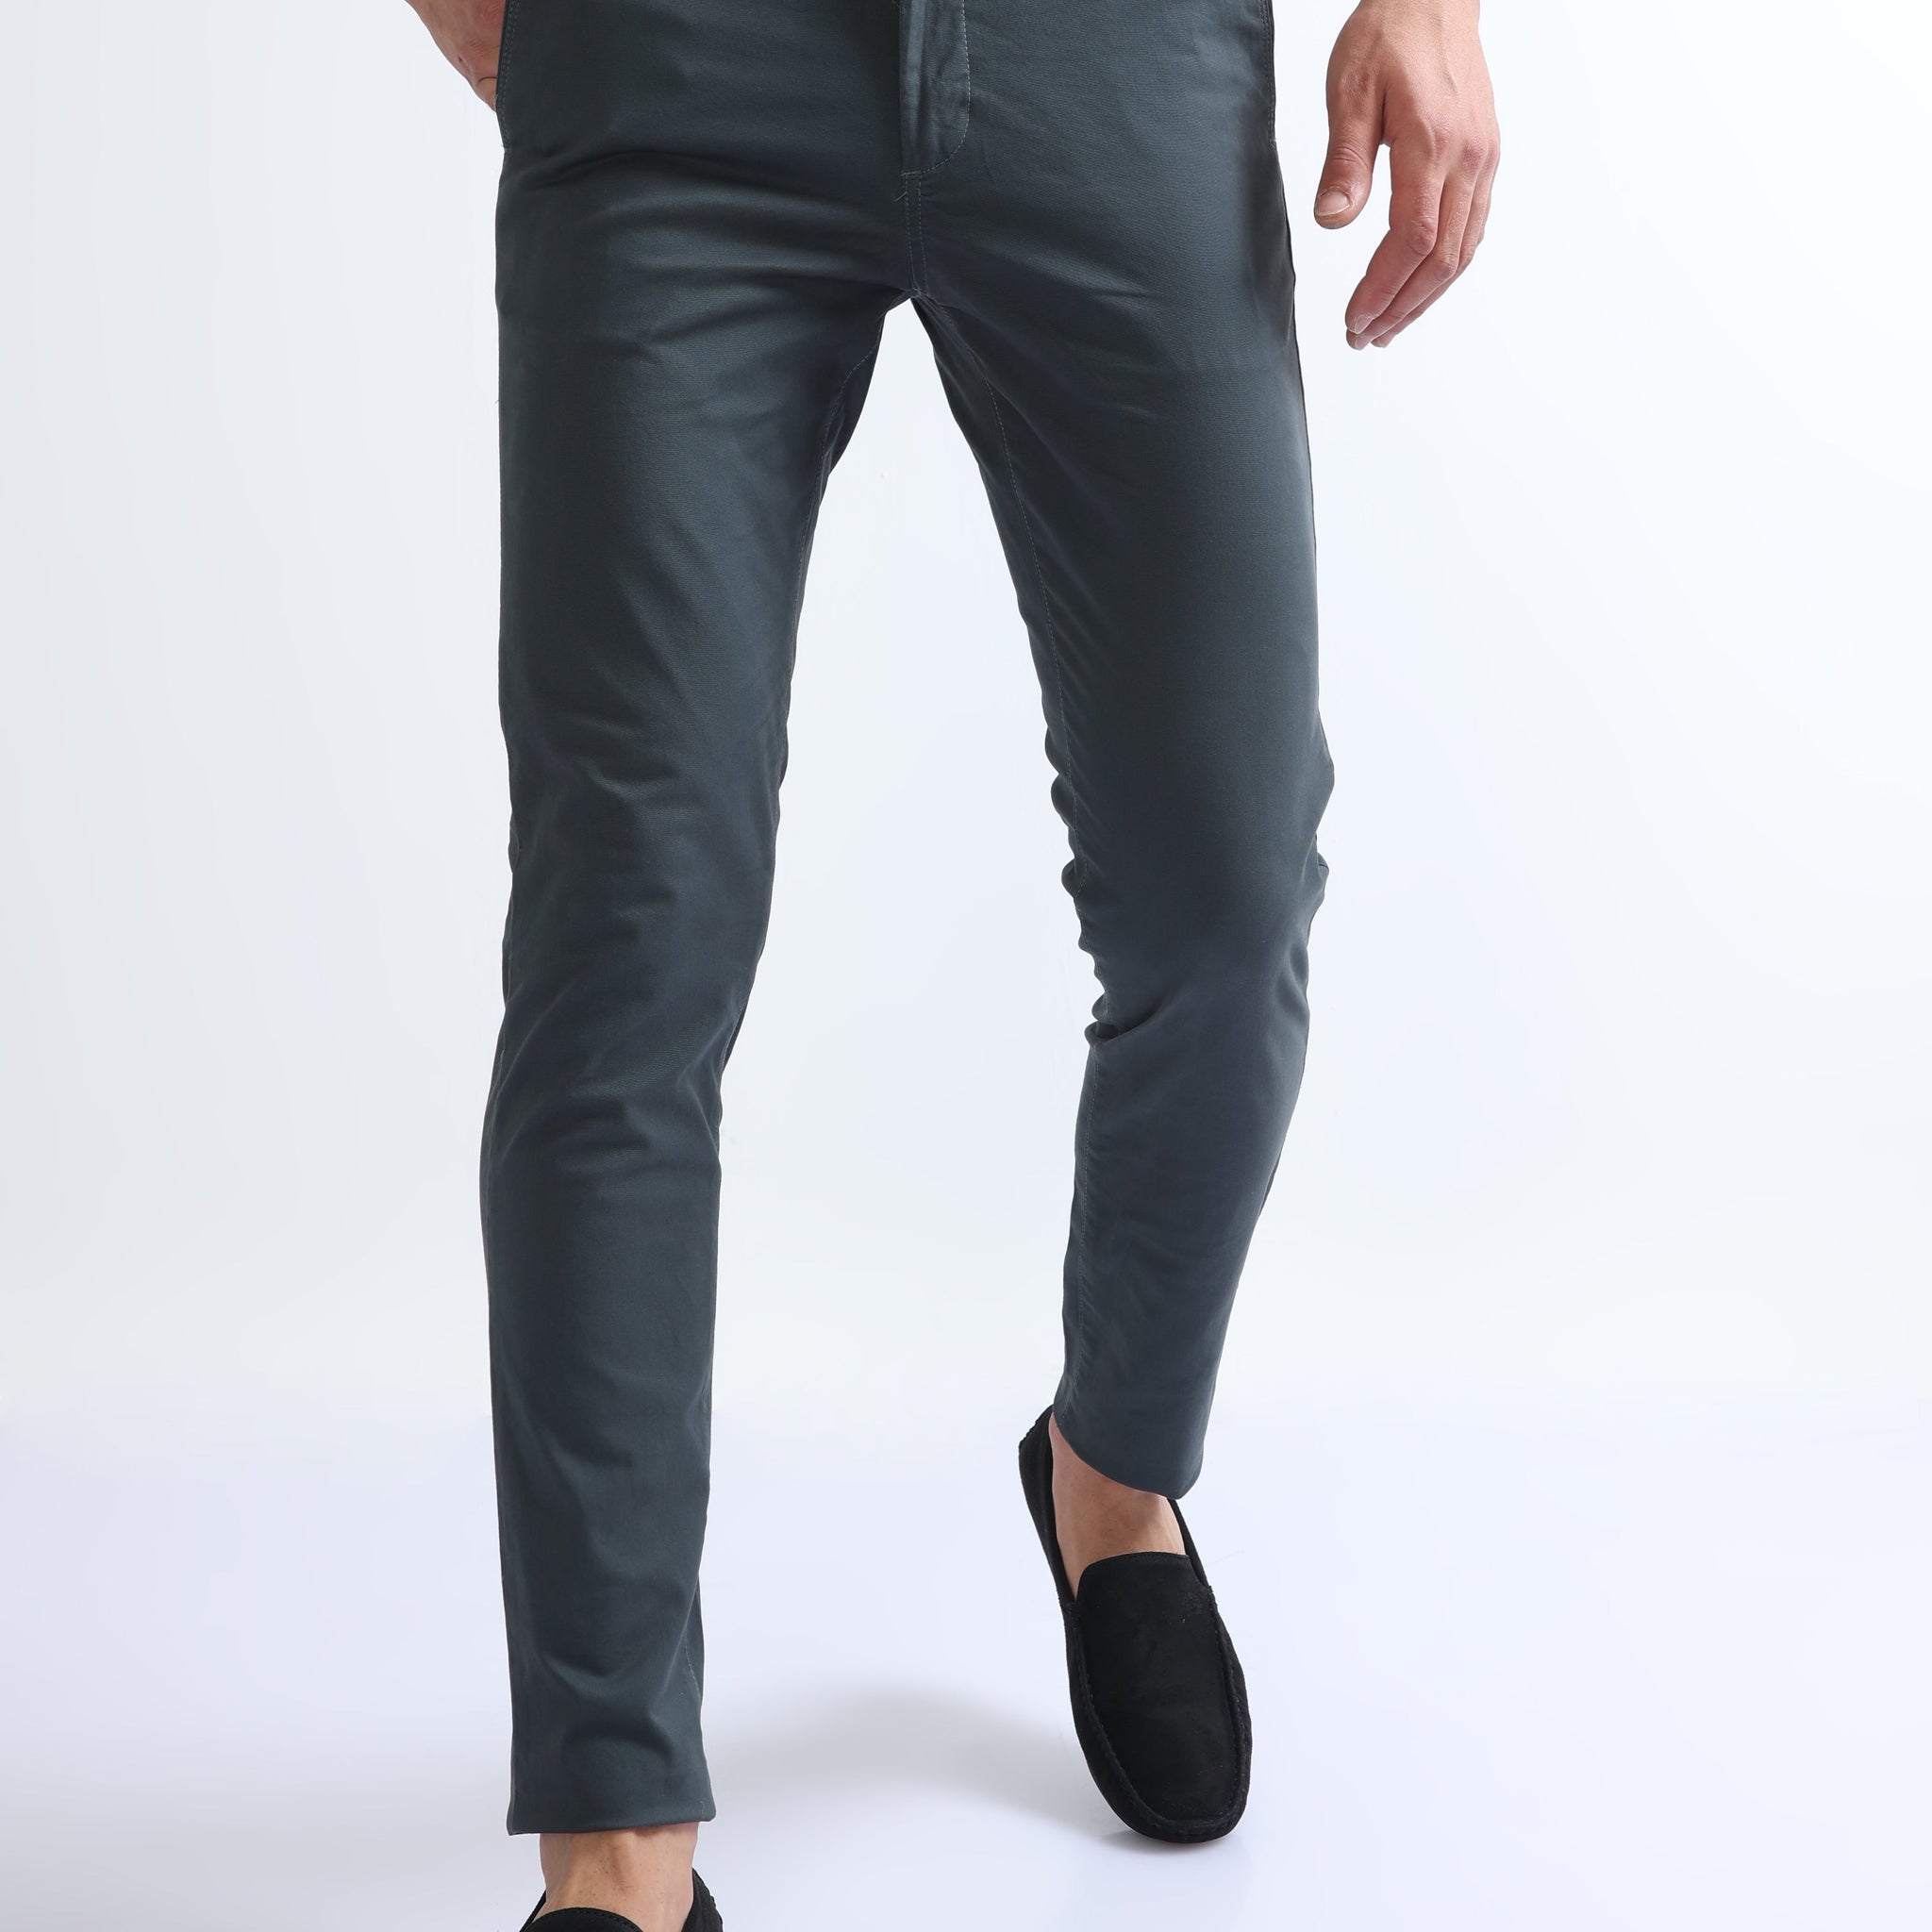 Teal Men's Cotton Twill Stretch Trousers